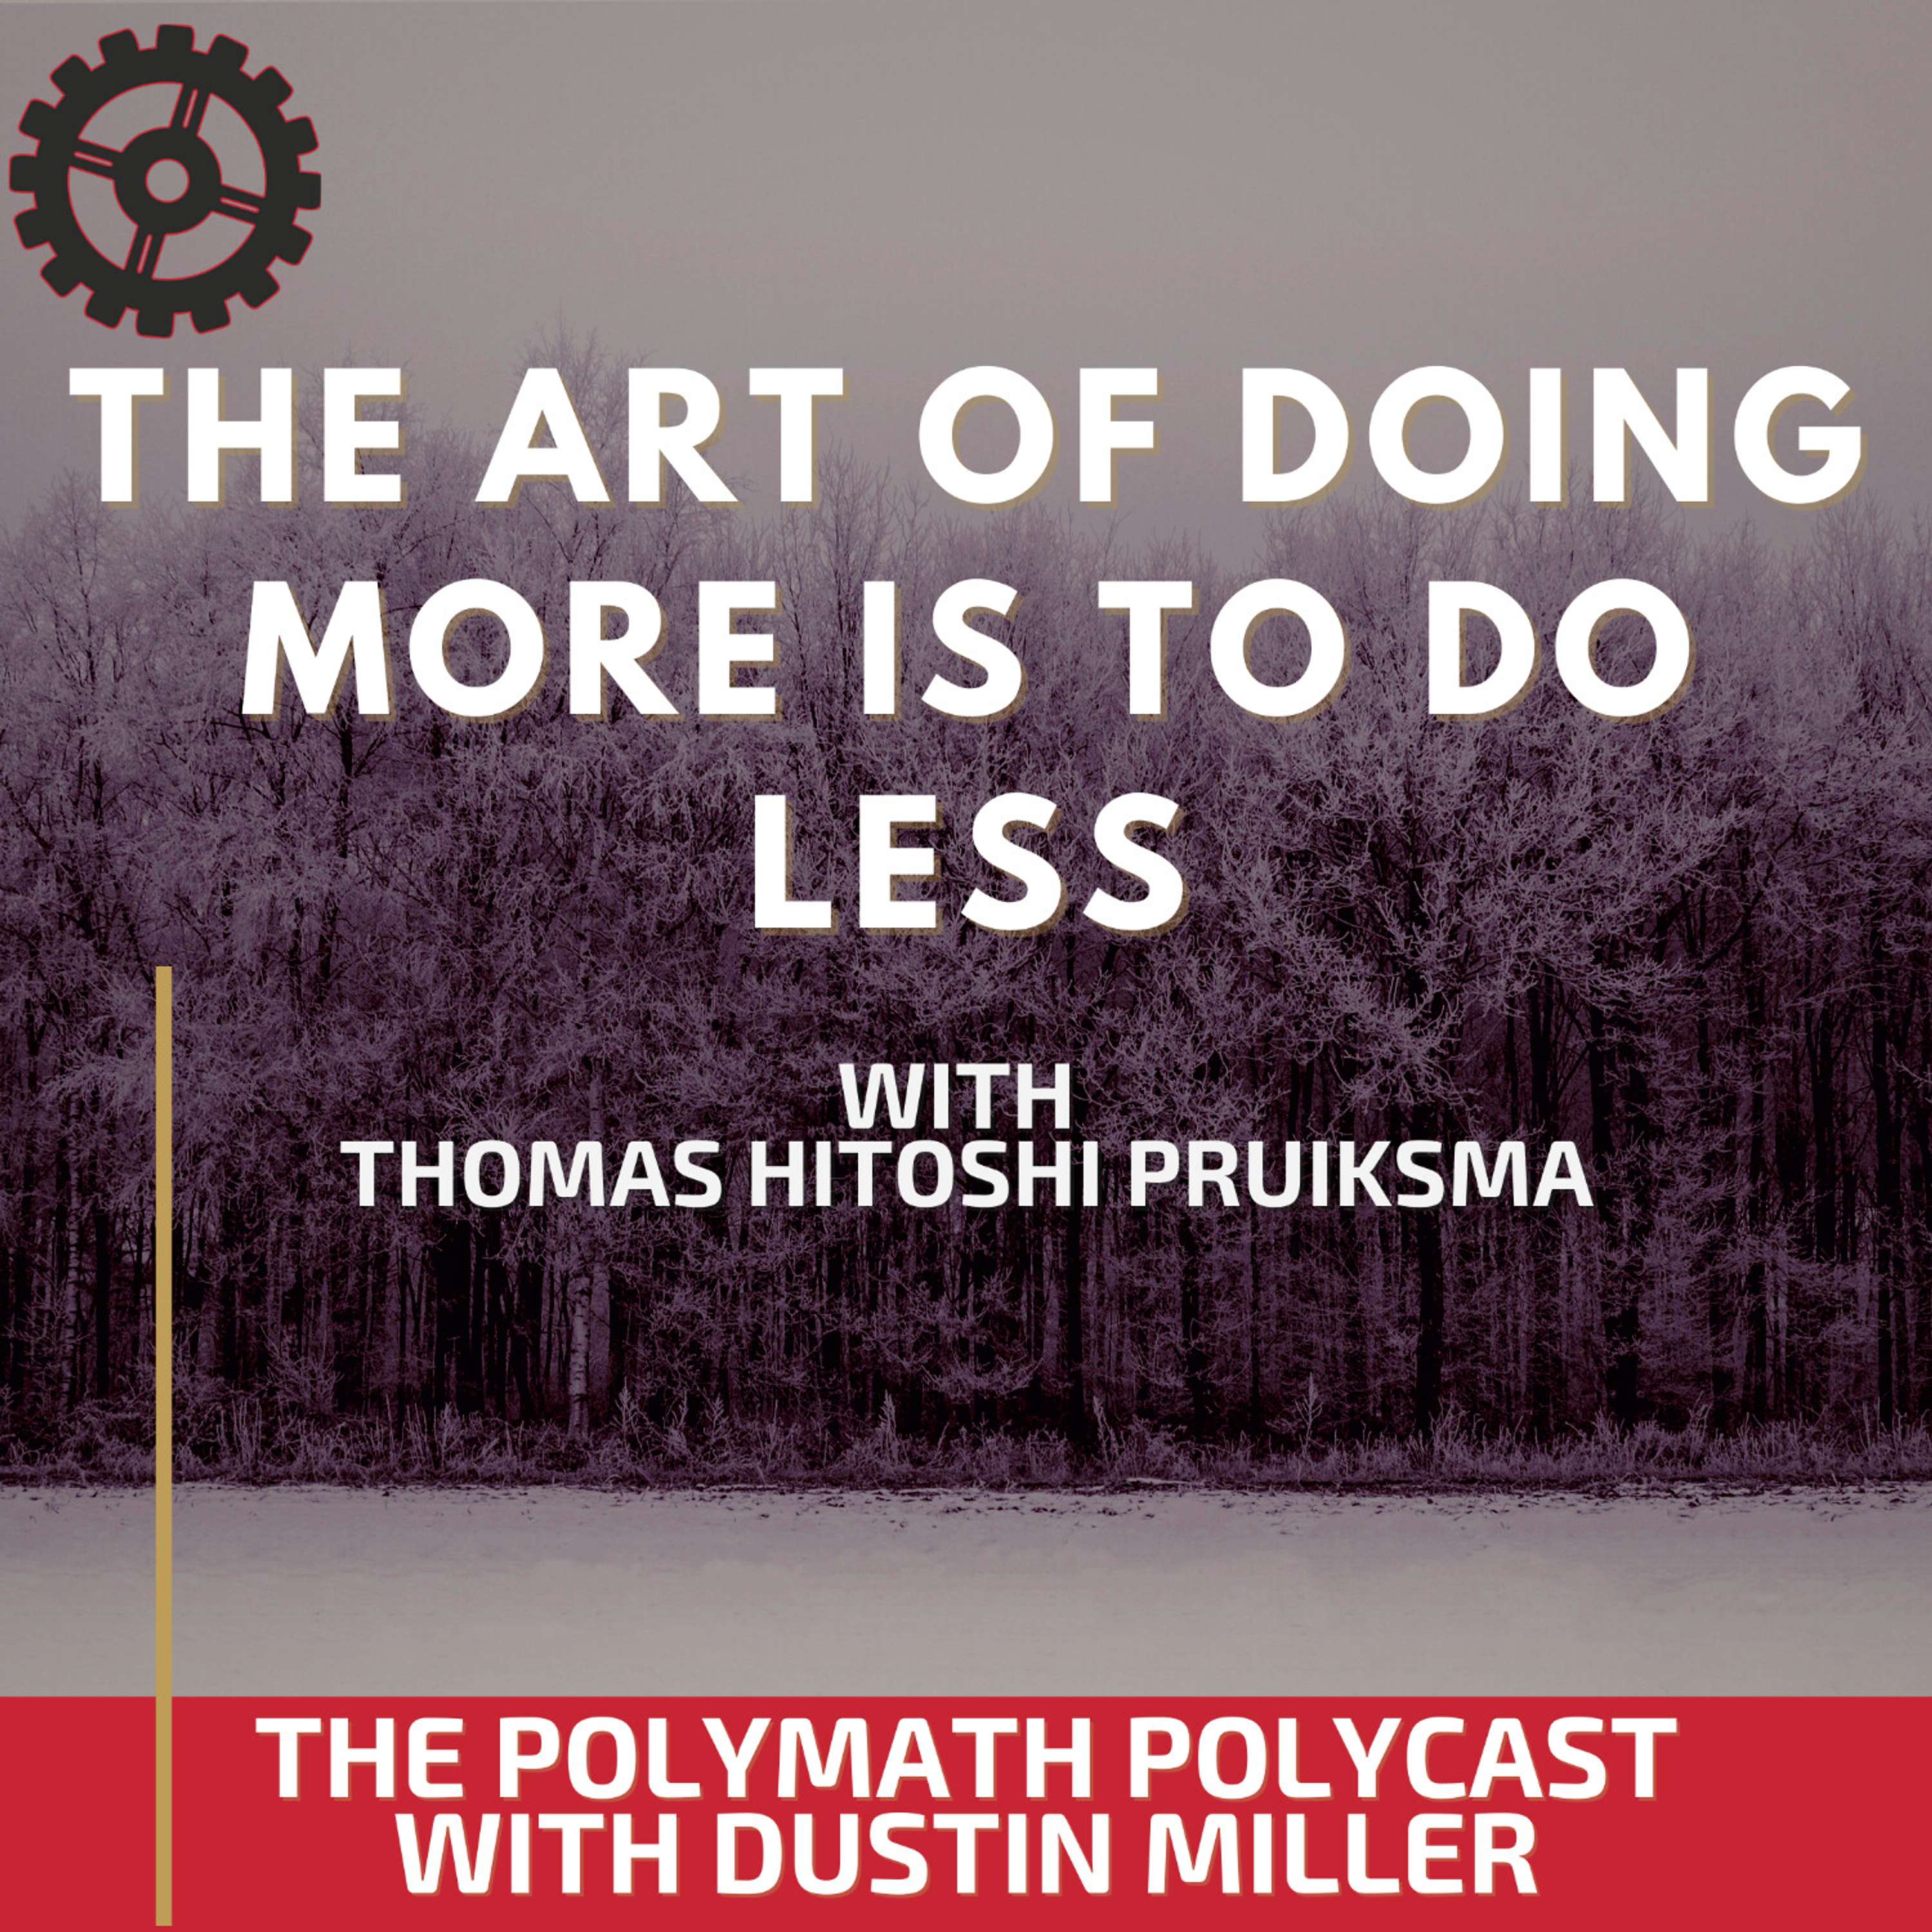 The Art of Doing More is to do Less with Thomas Hitoshi Pruiksma [Interview]